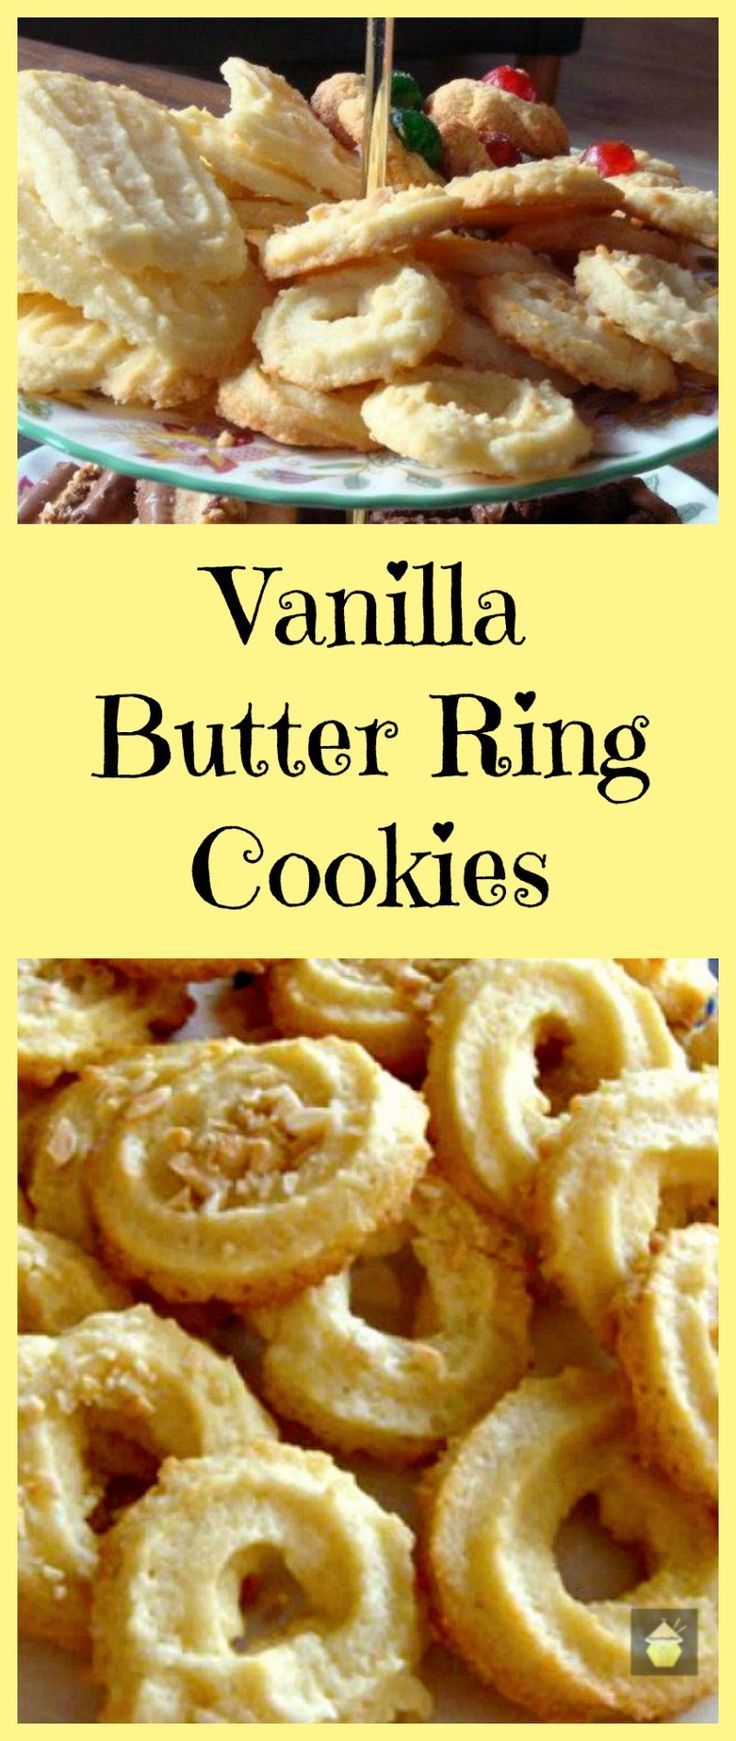 Vanilla Butter Ring Cookies. These little cookies have a wonderful vanilla flavor and melt in your mouth.